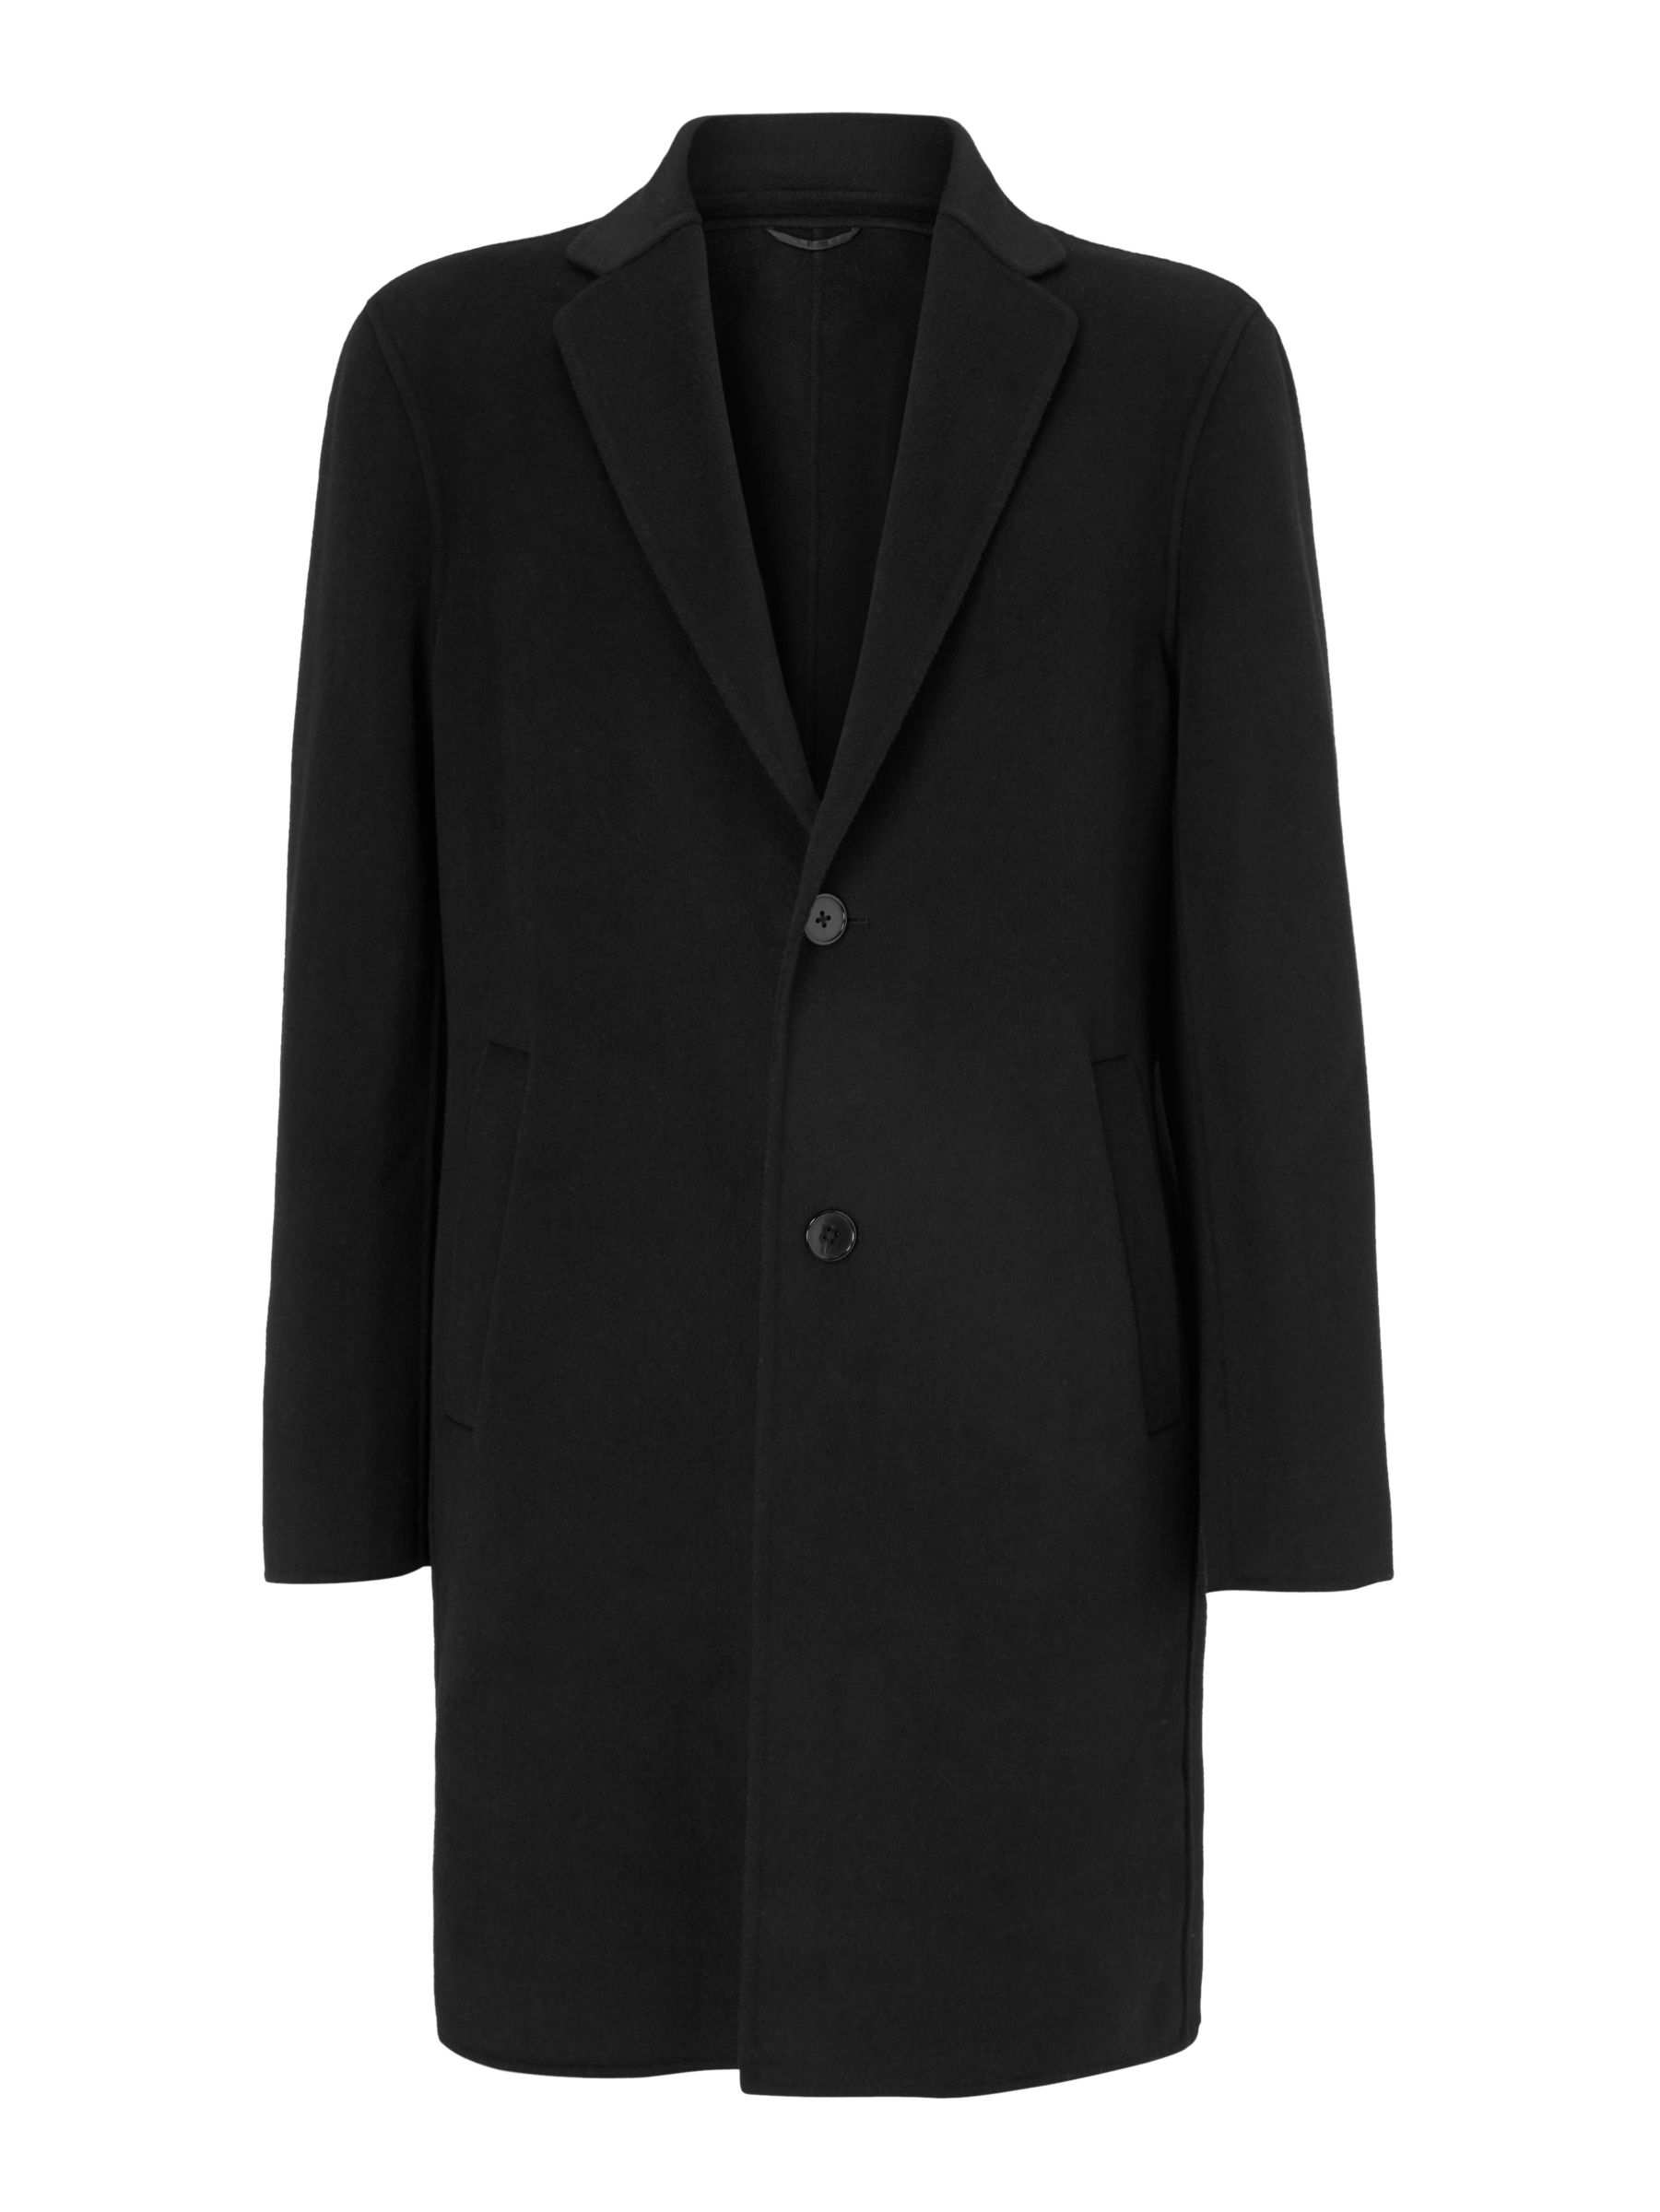 Kin Double Faced Wool Blend Overcoat, Black at John Lewis & Partners